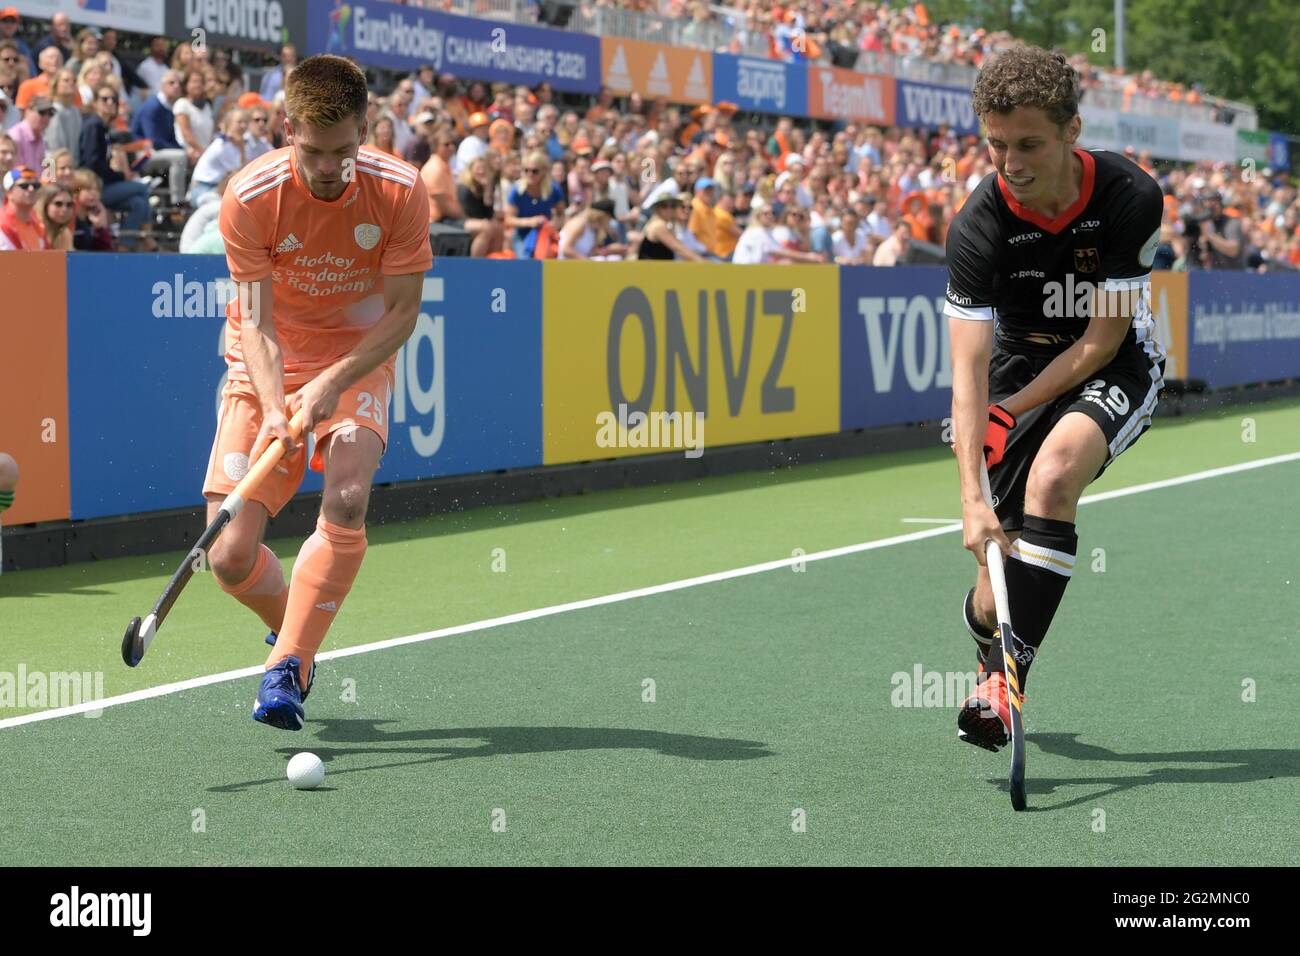 AMSTELVEEN, NETHERLANDS - JUNE 12: Thierry Brinkman of the Netherlands, Johannes Grosse of Germany during the Euro Hockey Championships Men match between Germany and Netherlands at Wagener Stadion on June 12, 2021 in Amstelveen, Netherlands (Photo by Gerrit van Keulen/Orange Pictures) Stock Photo